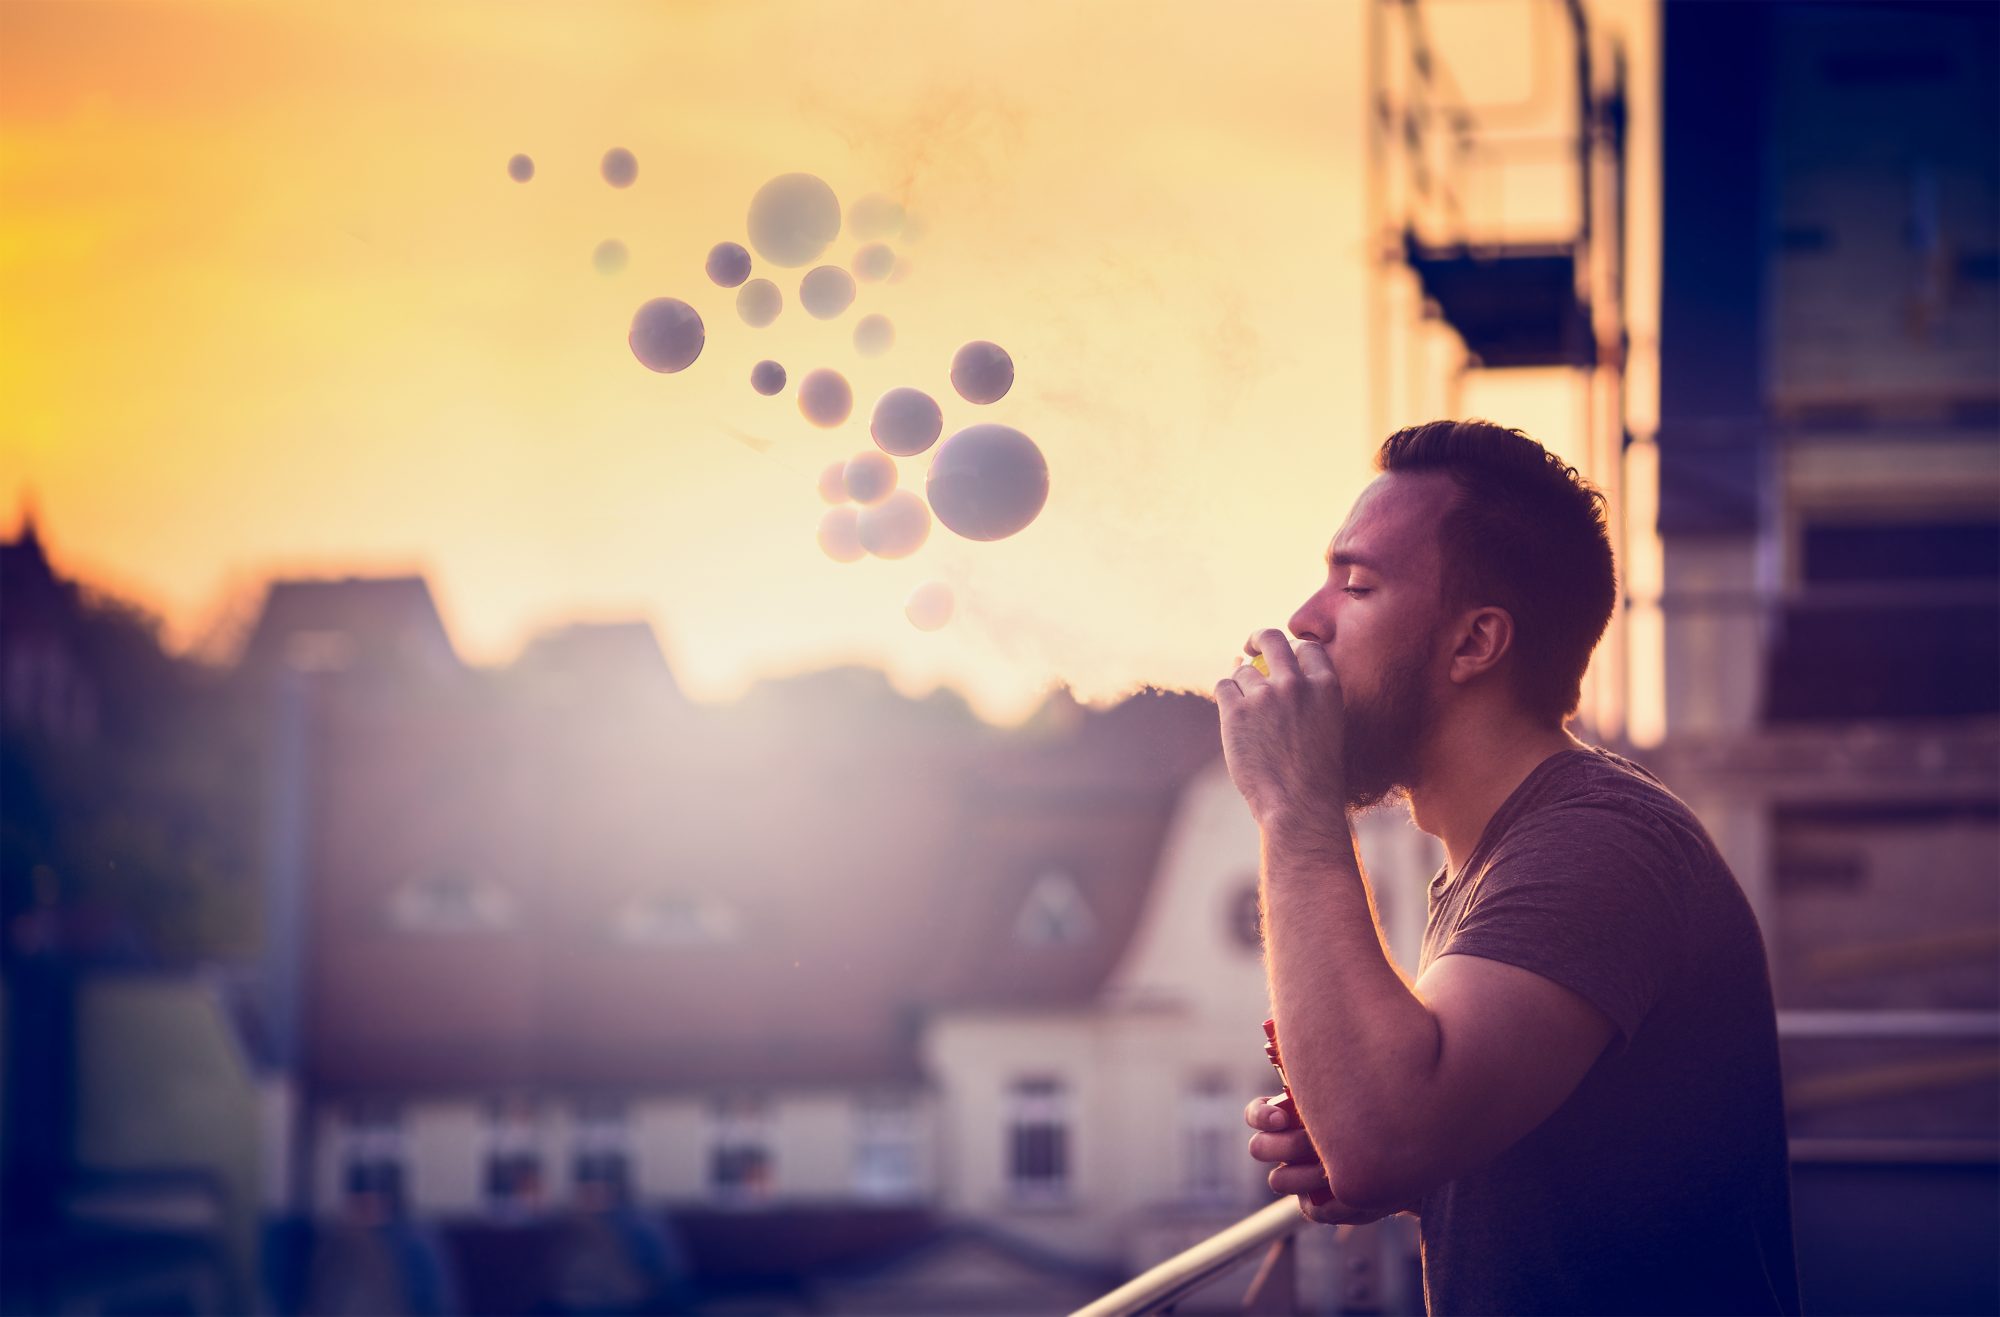 Young man with beard on blurry background sunset sky, making soap bubbles smoke inside with the aid of vape